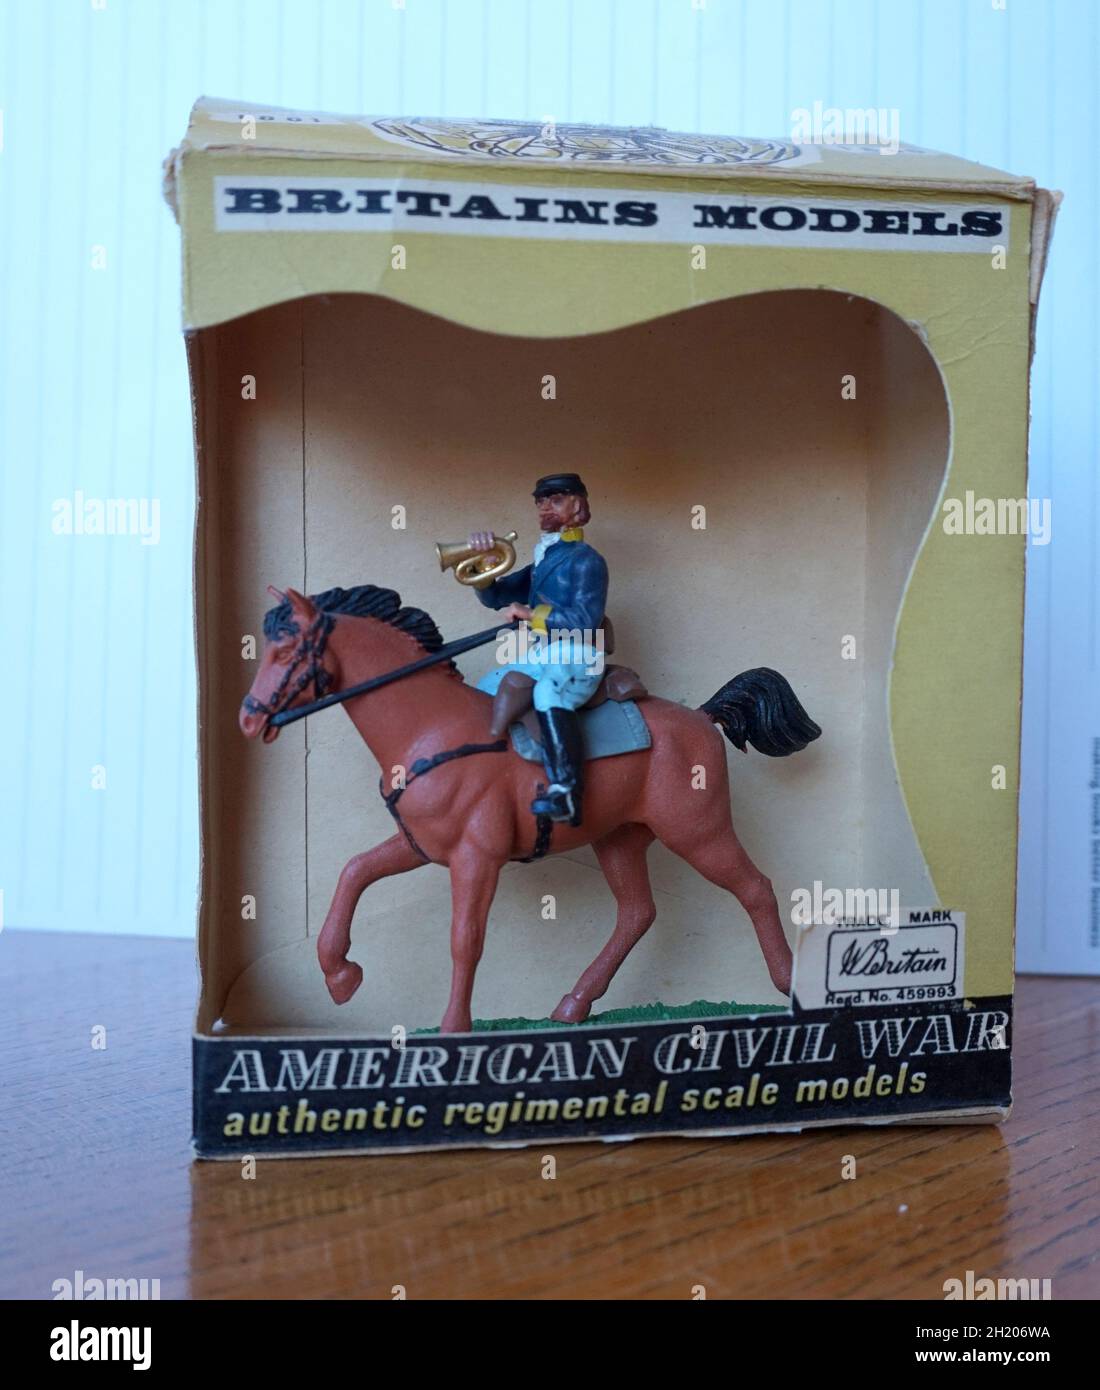 This is one of the many toys and figures produced by the firm of W. Britain.  The cavalryman was one of a set devoted to the American Civil War, launched in the mid-Sixties to replace an older range of solid figures.  original price of 3s 11d, designed and manufactured in England. In original packaging, now very collectable. Stock Photo